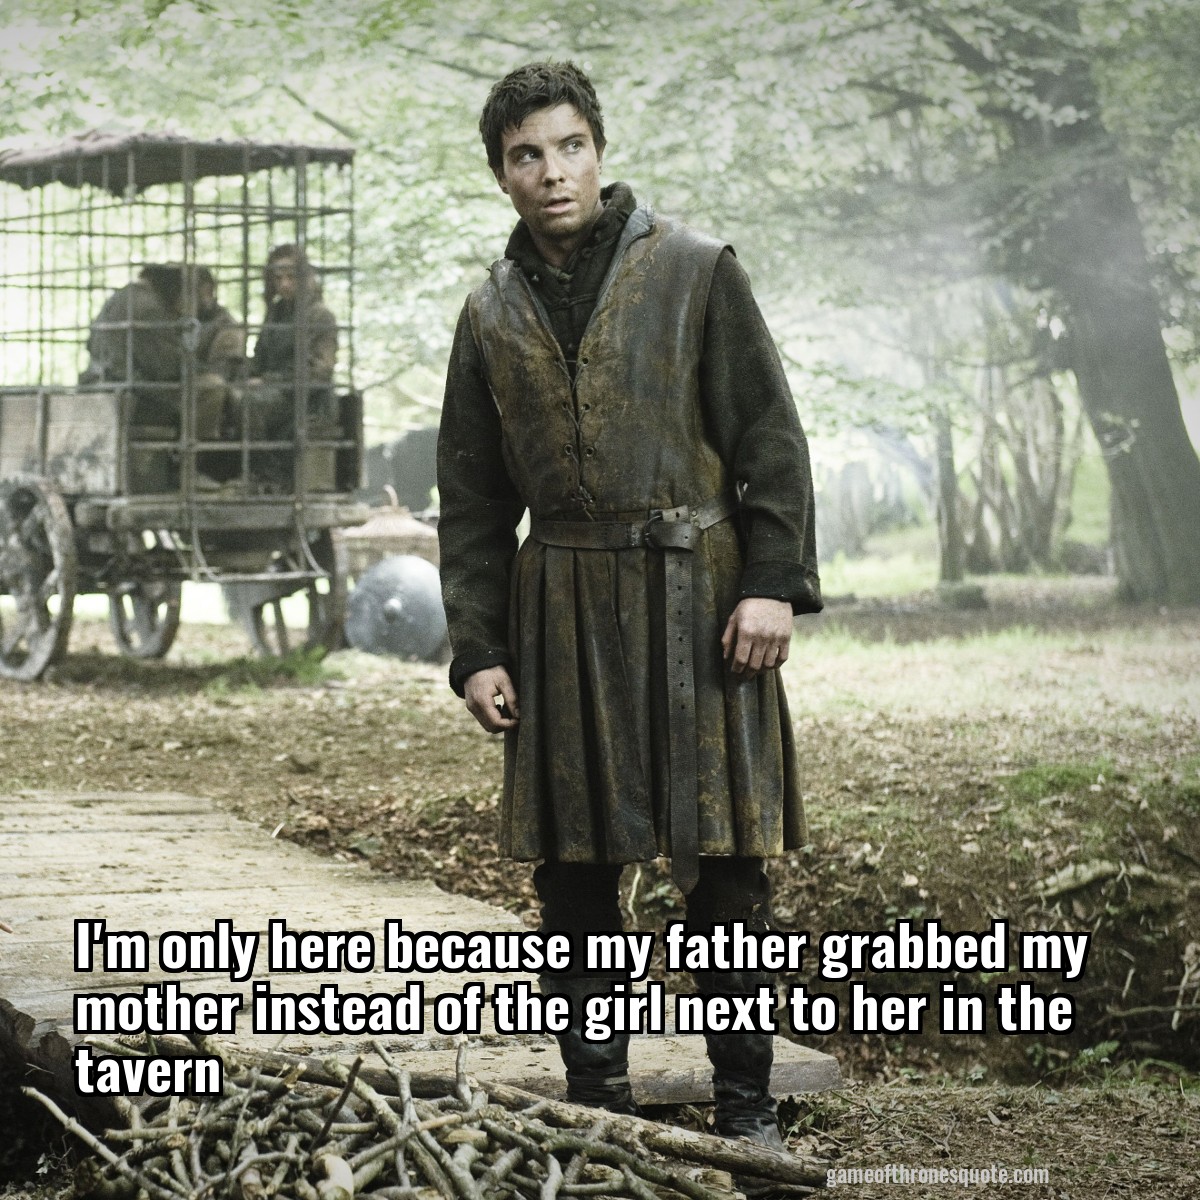 I'm only here because my father grabbed my mother instead of the girl next to her in the tavern